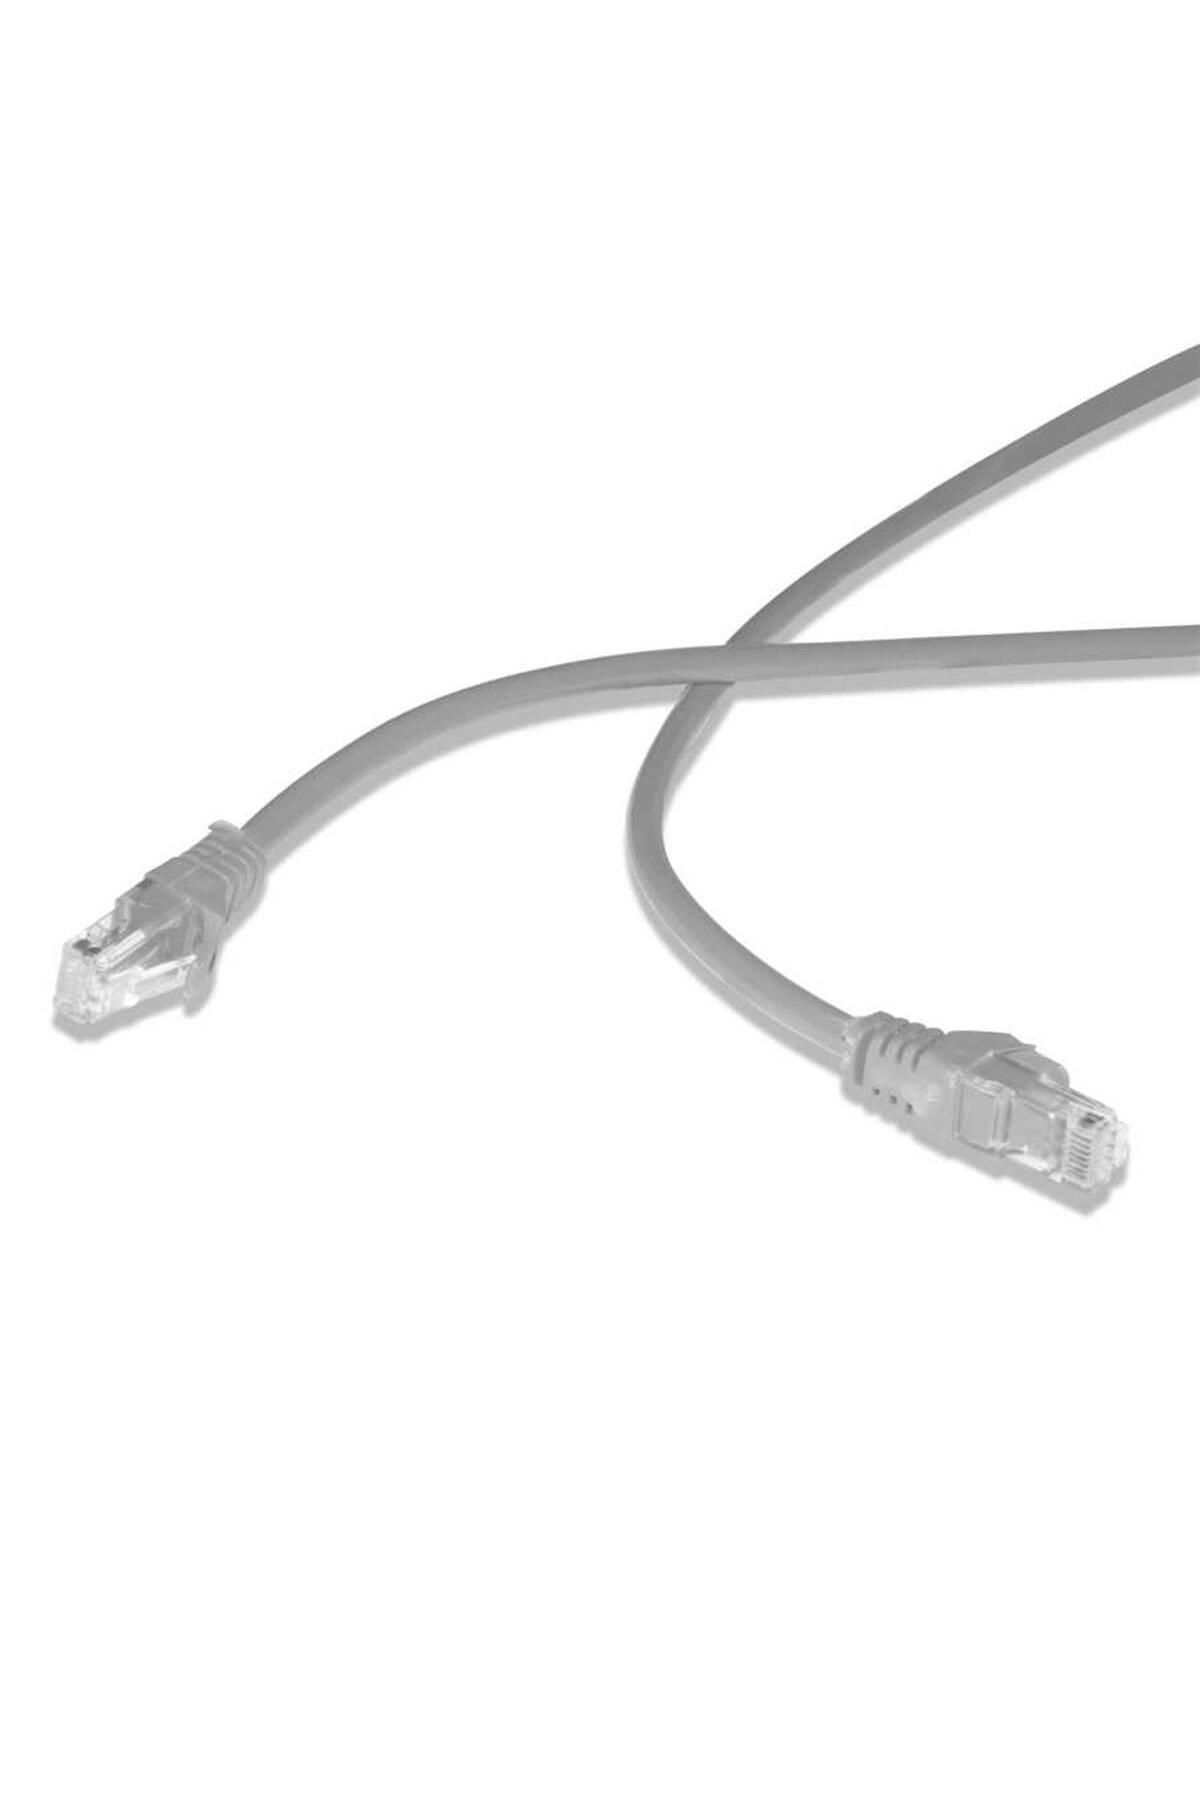 FLAXES Fnk-602g Cat6 Patch Kablo 2 Metre 23 Awg